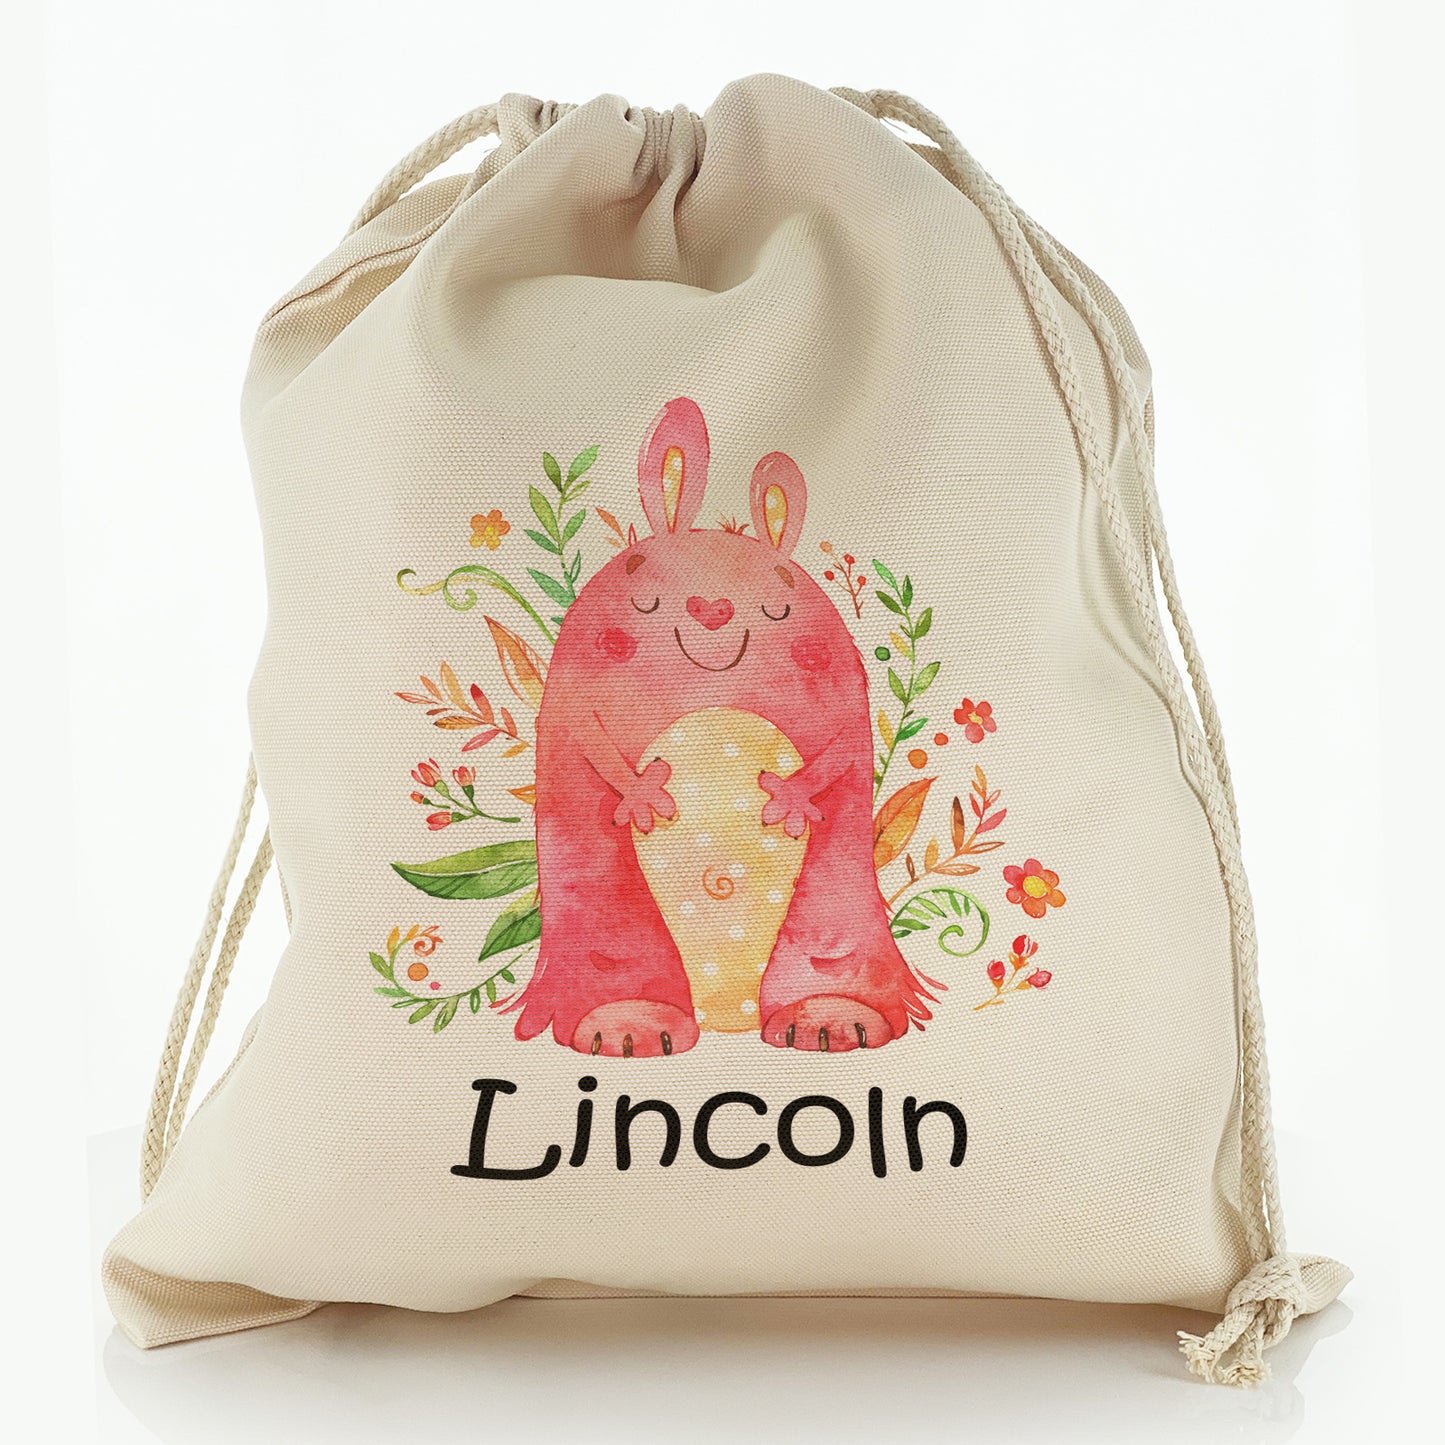 Personalised Canvas Sack with Childish Text and Flowered Red Rabbit Monster